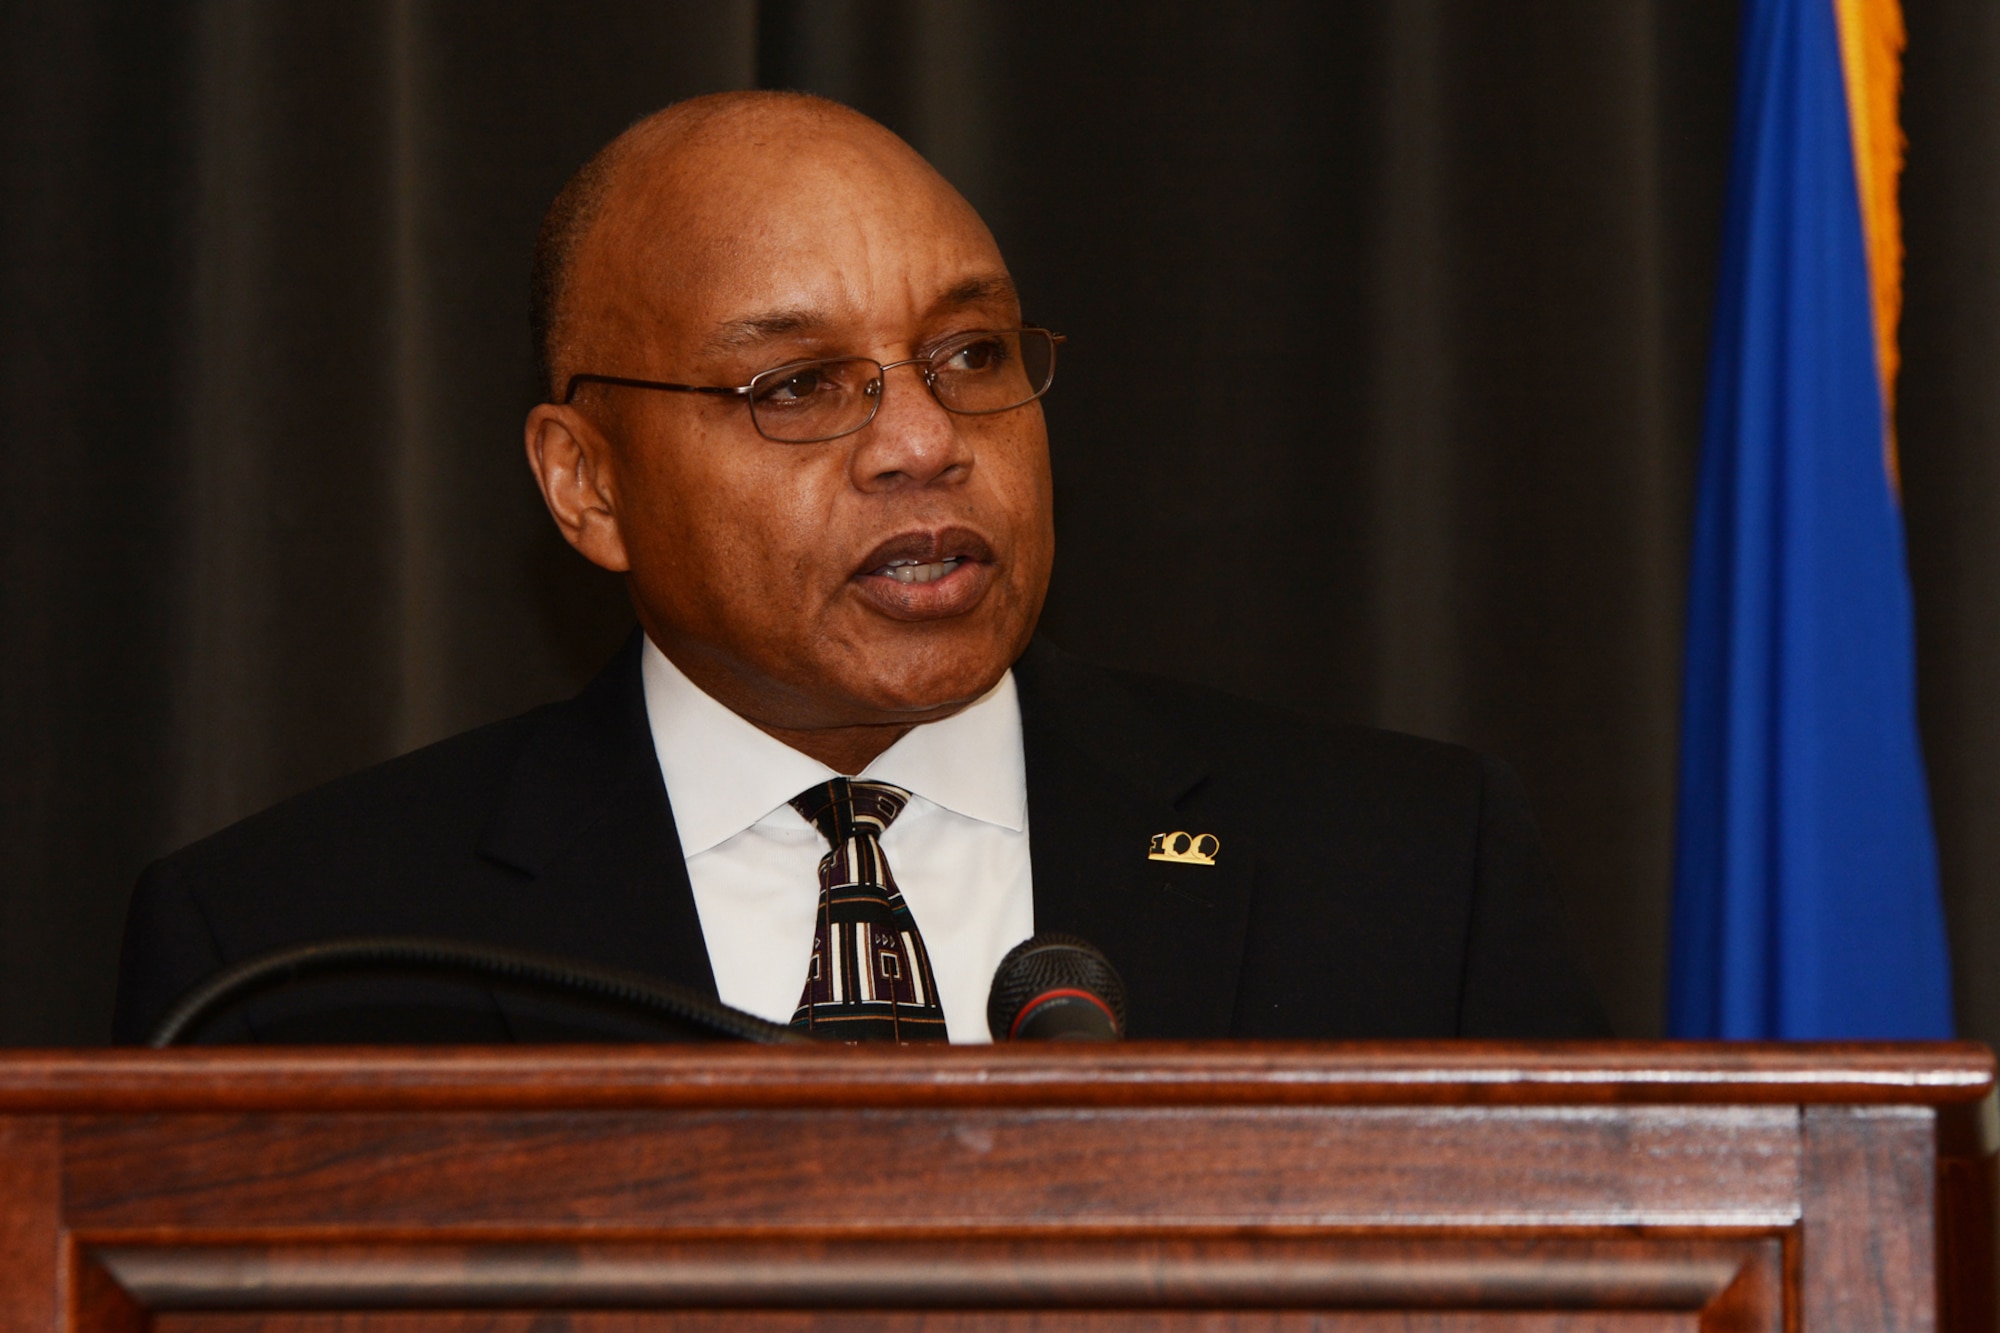 Former Deputy Adjutant General for the State of Arkansas, Retired Brig. Gen. William J. Johnson, speaks during the 19th Airlift Wing’s Rev. Dr. Martin Luther King, Jr., March and Celebration at Little Rock Air Force Base, Ark., Jan. 13, 2017.  Team Little Rock celebrated “Unity in Community” with local entertainment, food and a commemorative walk in honor of Dr. King. (U.S. Air Force photo by Master Sgt. Jeff Walston/Released)